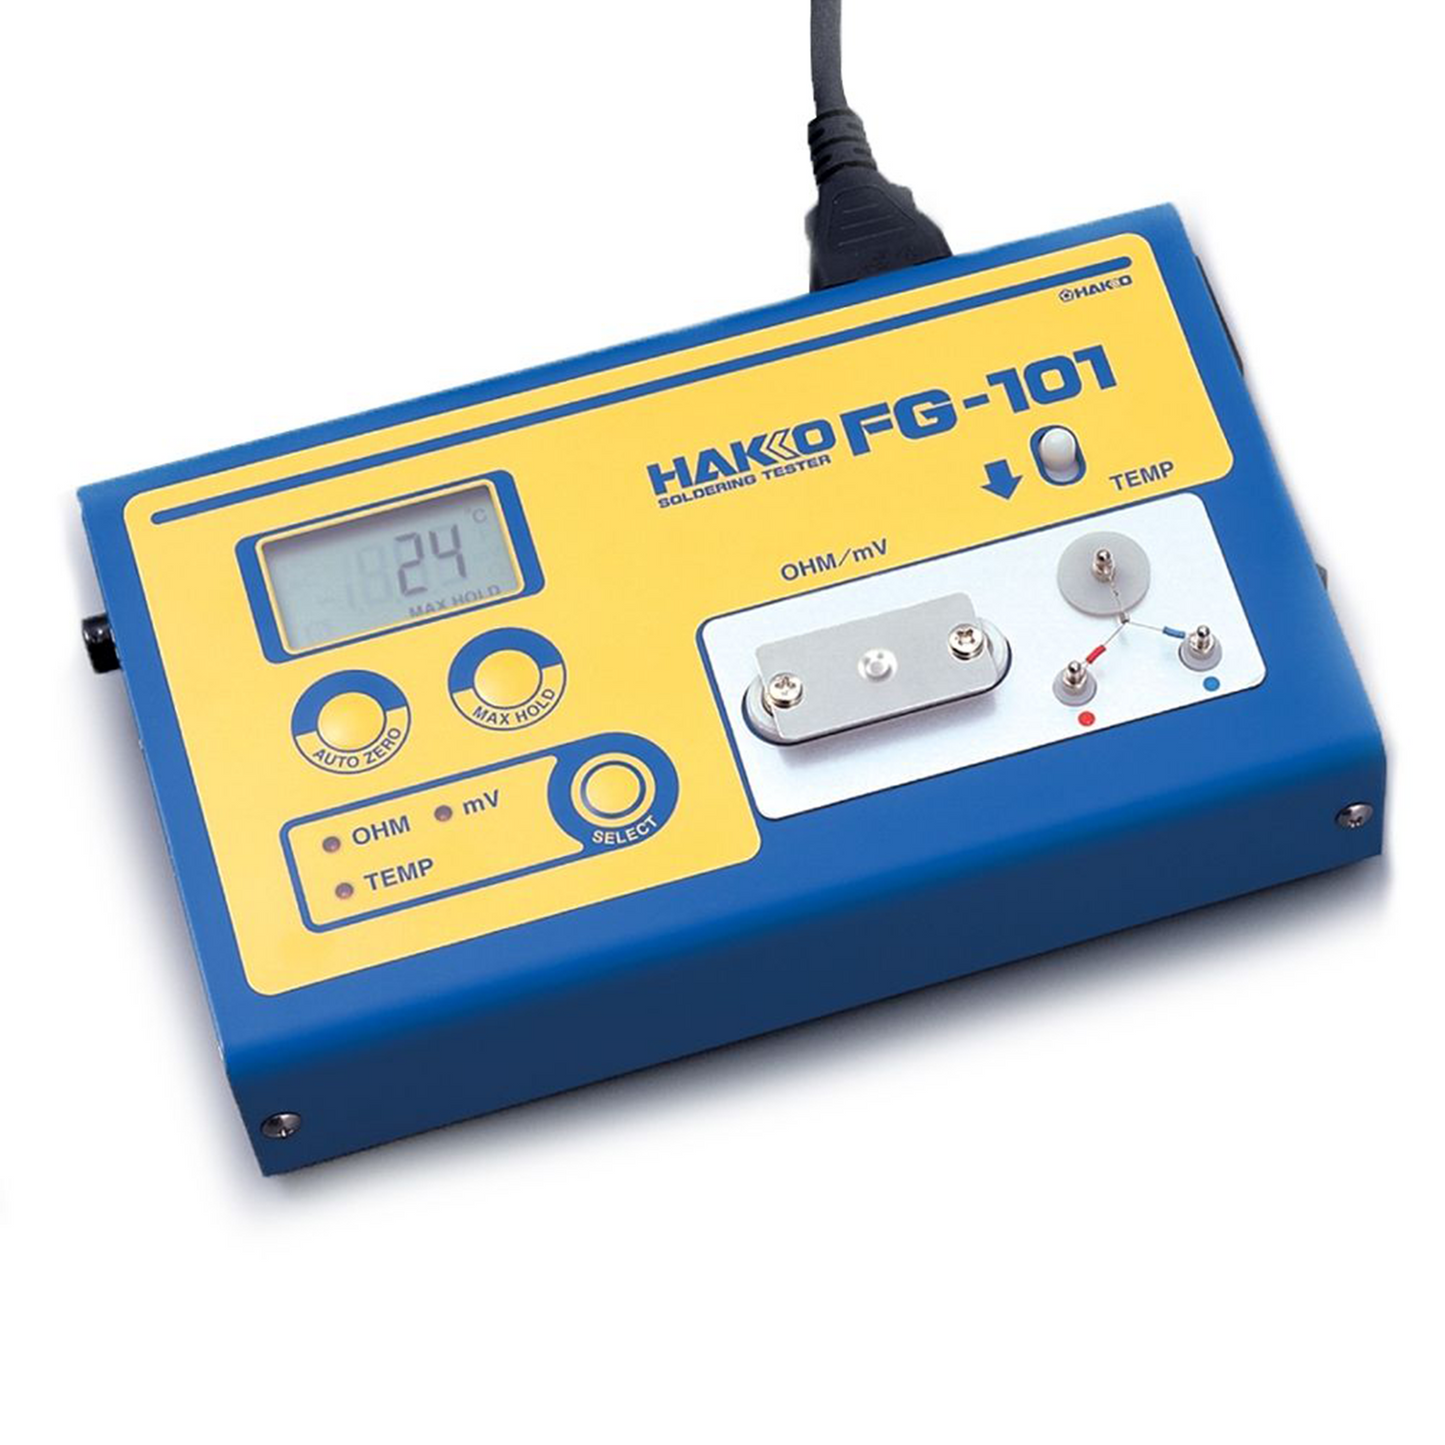 Hakko_ FG101B-16 Soldering Tester (Thermometer)_ Soldering Related Equipment and Materials_ Hakko Products